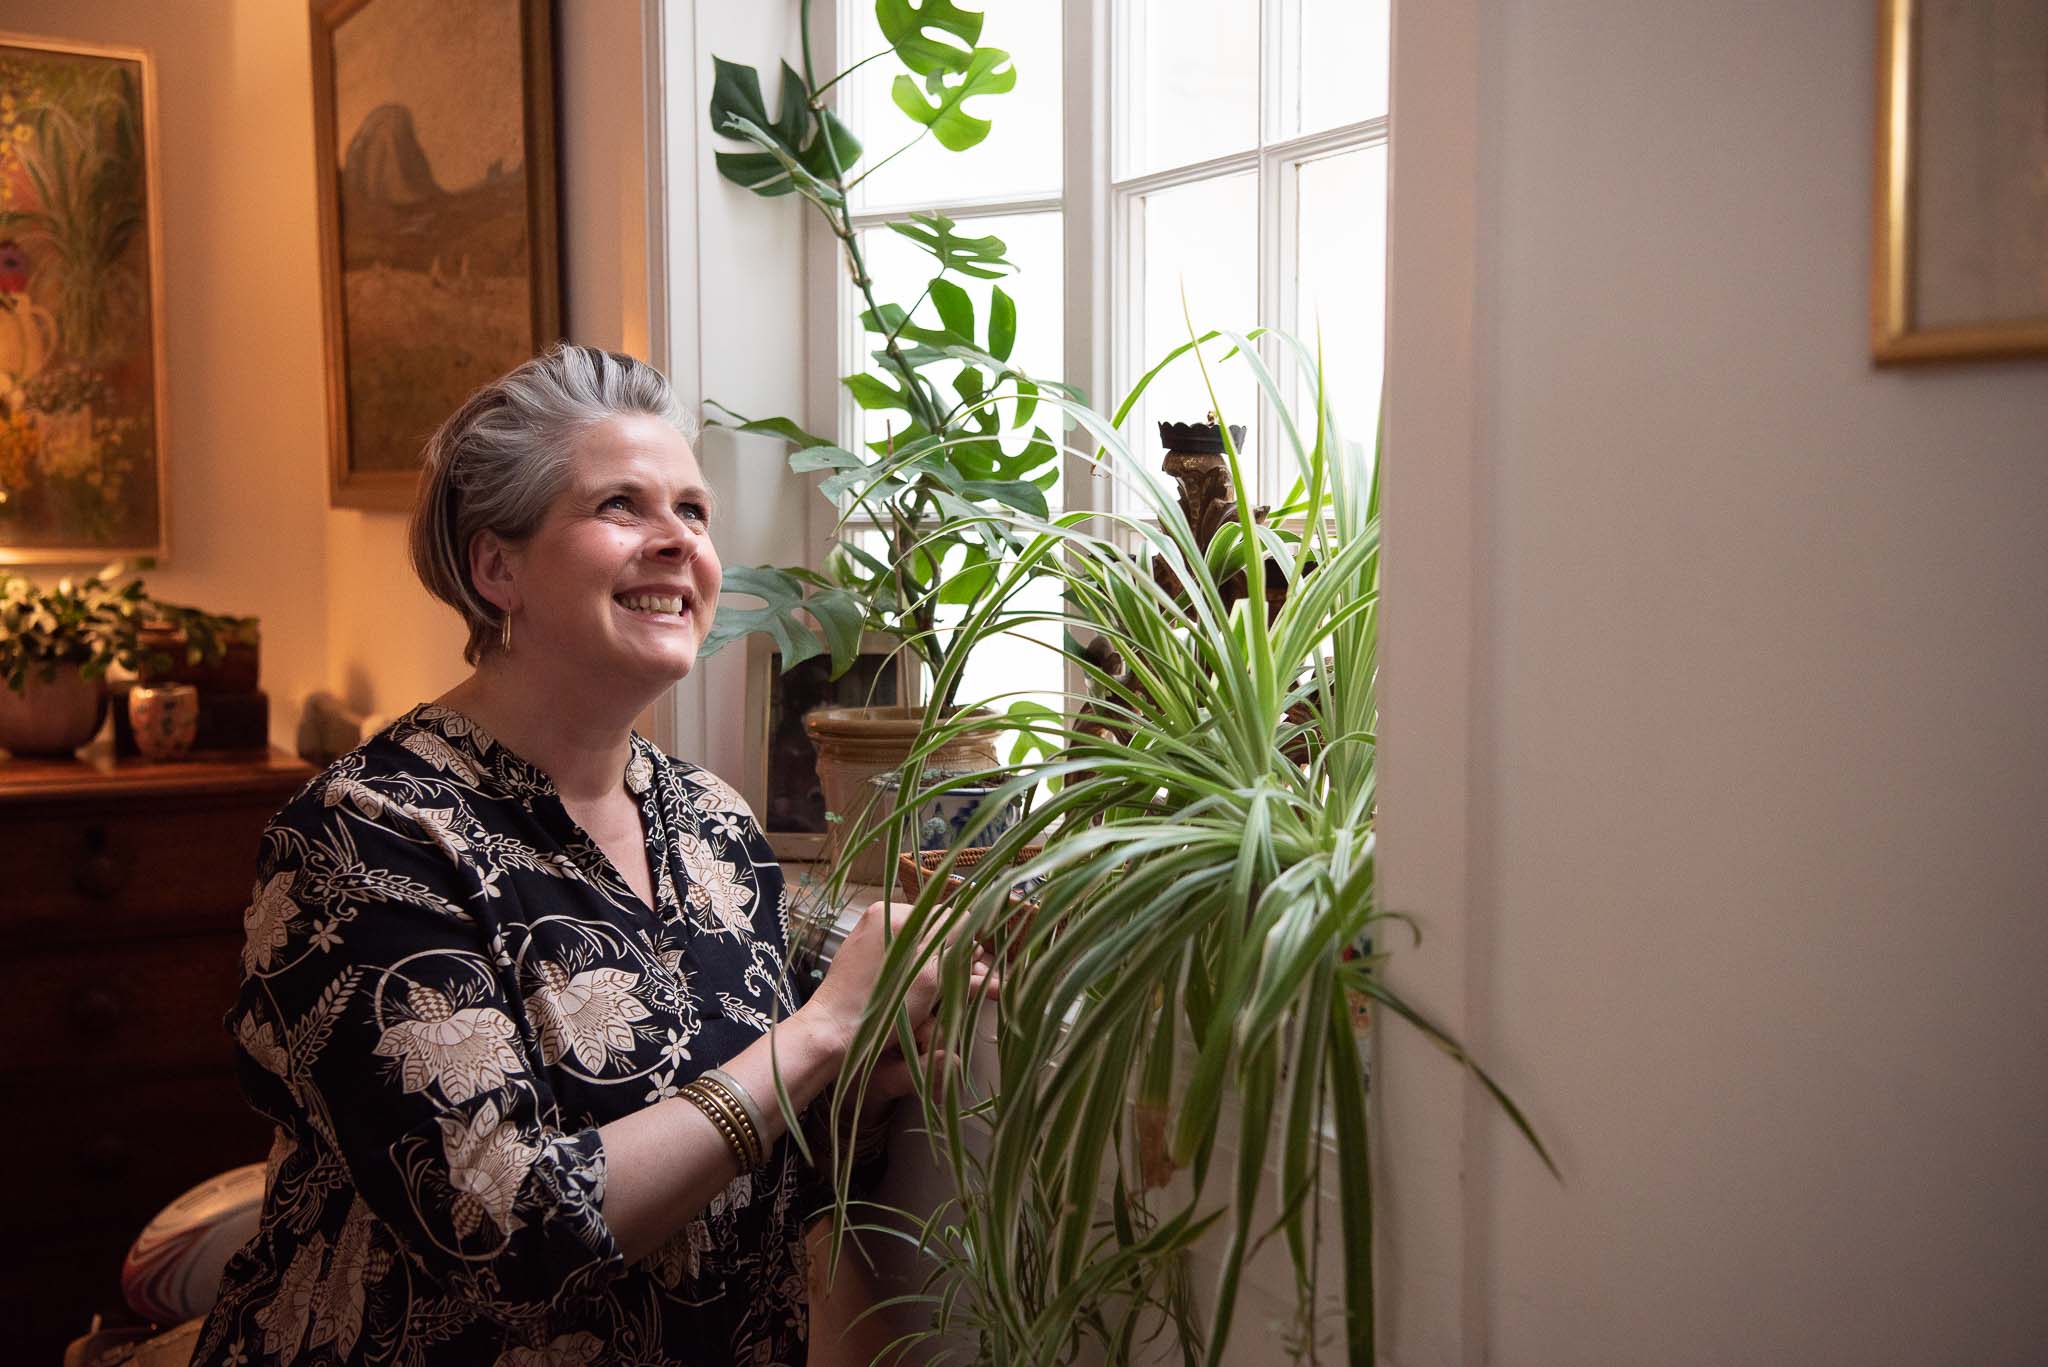 Brand photography in Scotland showing woman with spider plants in hall window